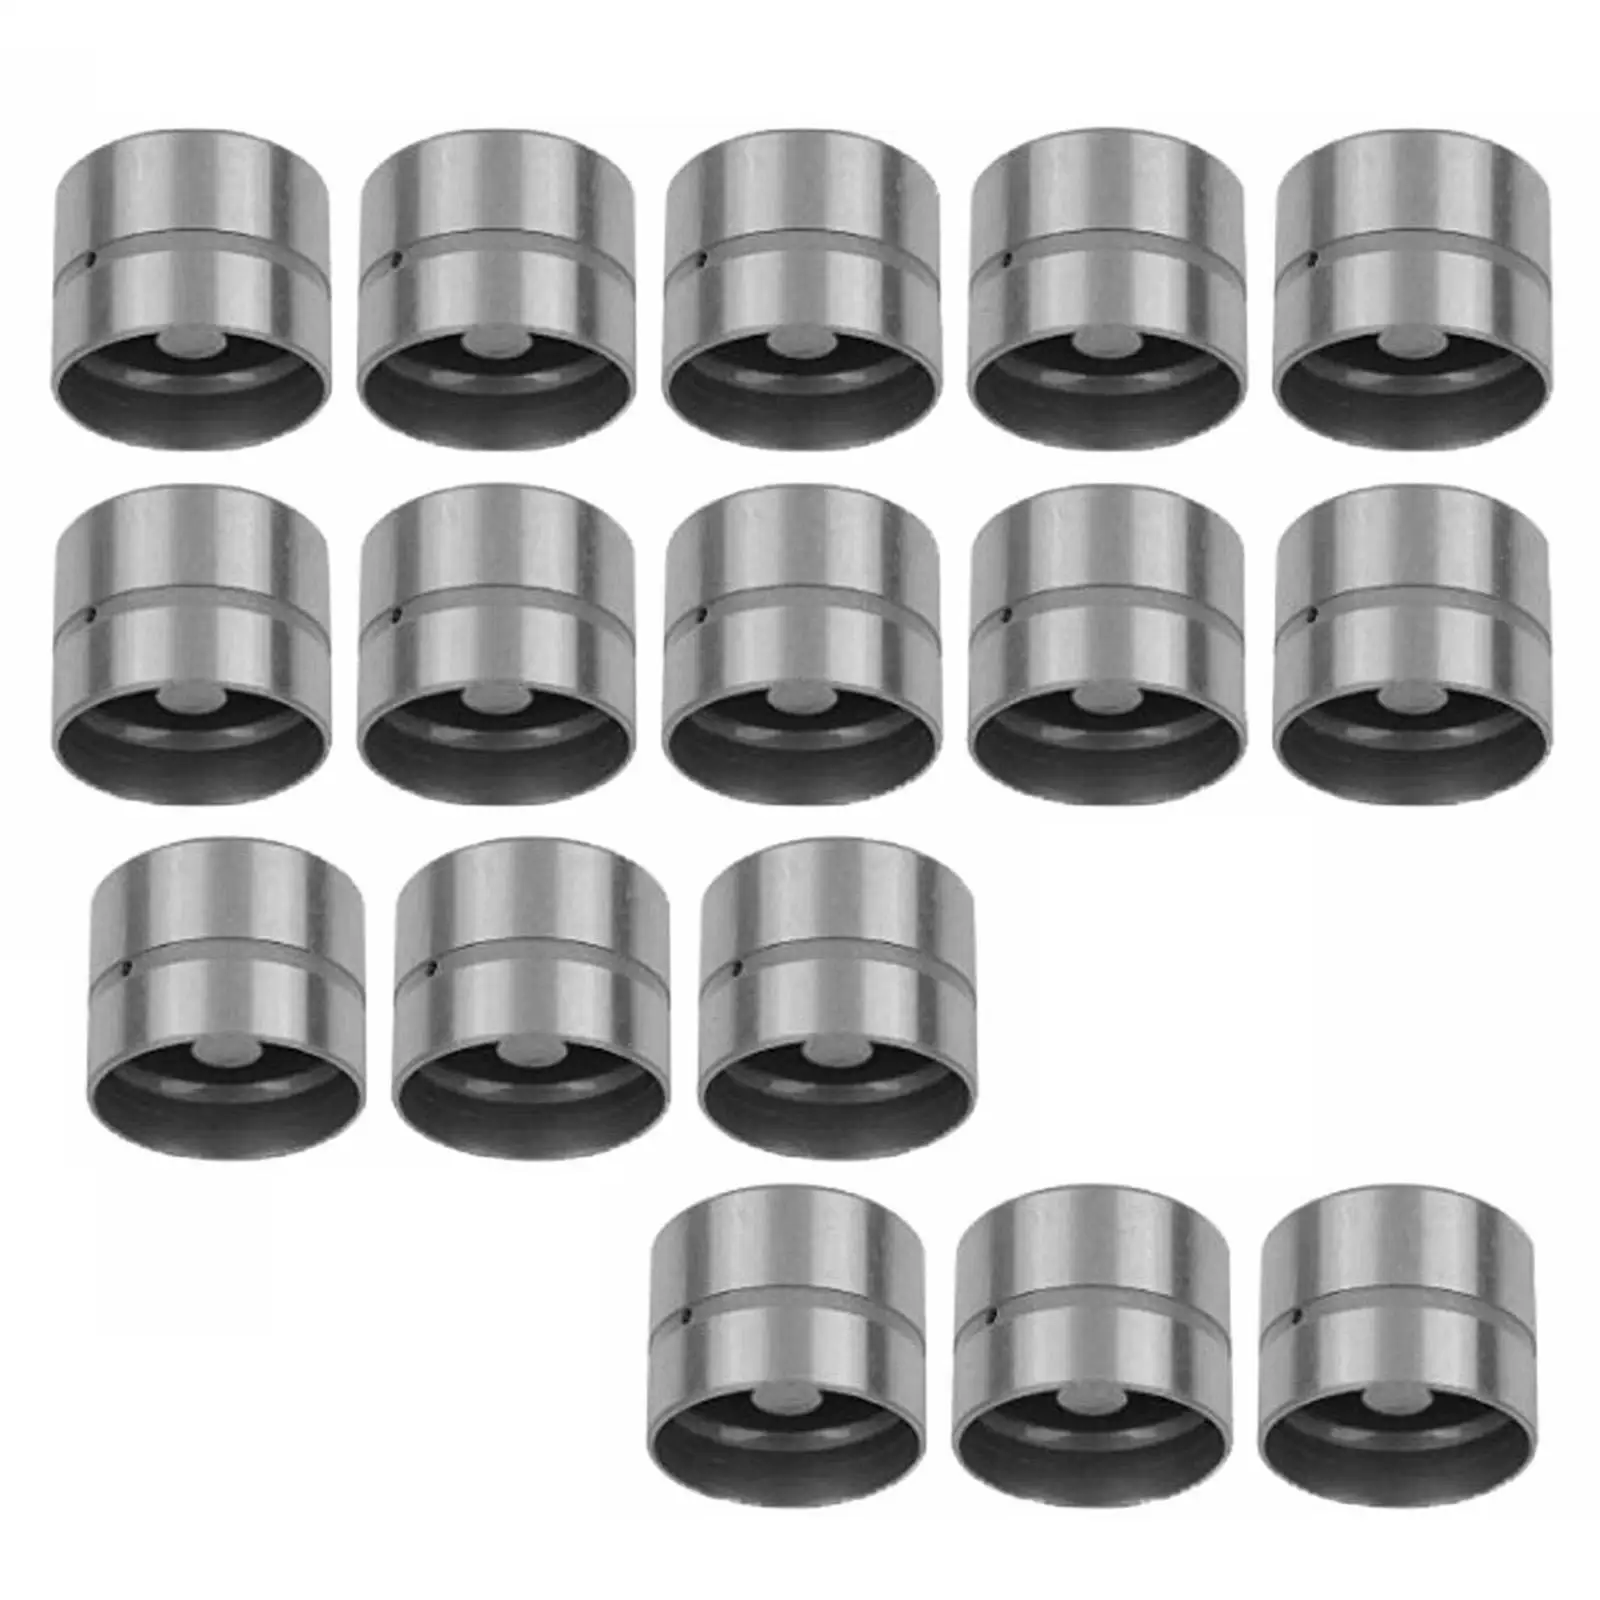 16 Pieces Hydraulic Lifters Tappets Engine Fit for 20XE C20XE 420011810